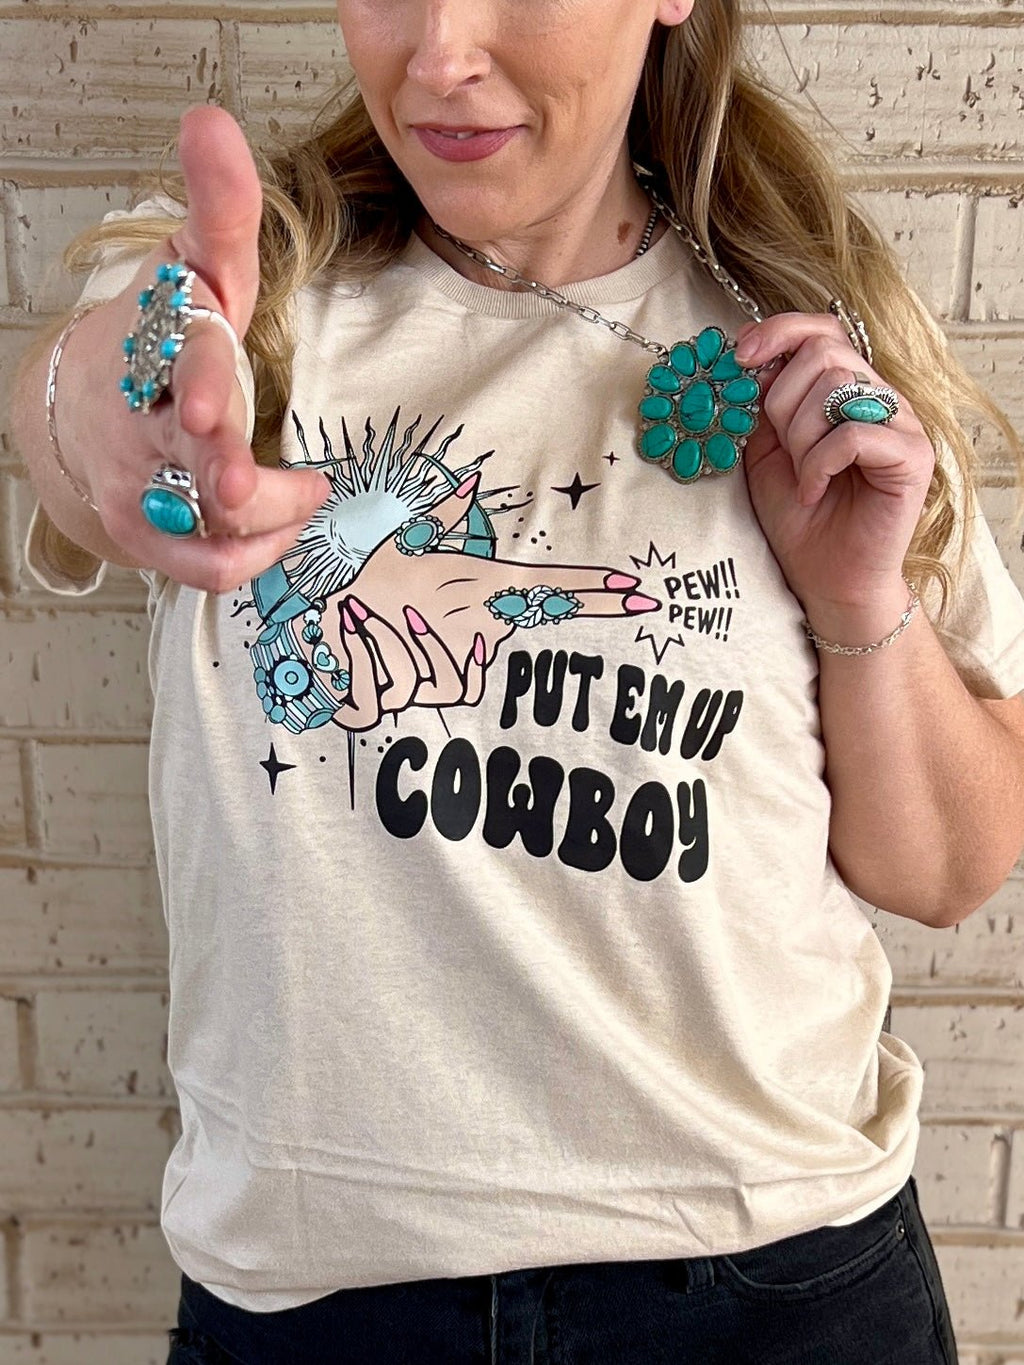 Western style. Western graphic tees. Western t-shirts. "Put em' up cowboy" shirt. Western t-shirts. Shirt with a skeleton hand on it. Shirts with turquoise rings on it. Western shirts. Graphic T-shirts. Graphic tees. Western boutique. Women's western graphic tees. Women's western boutique. Small business. Woman owned.